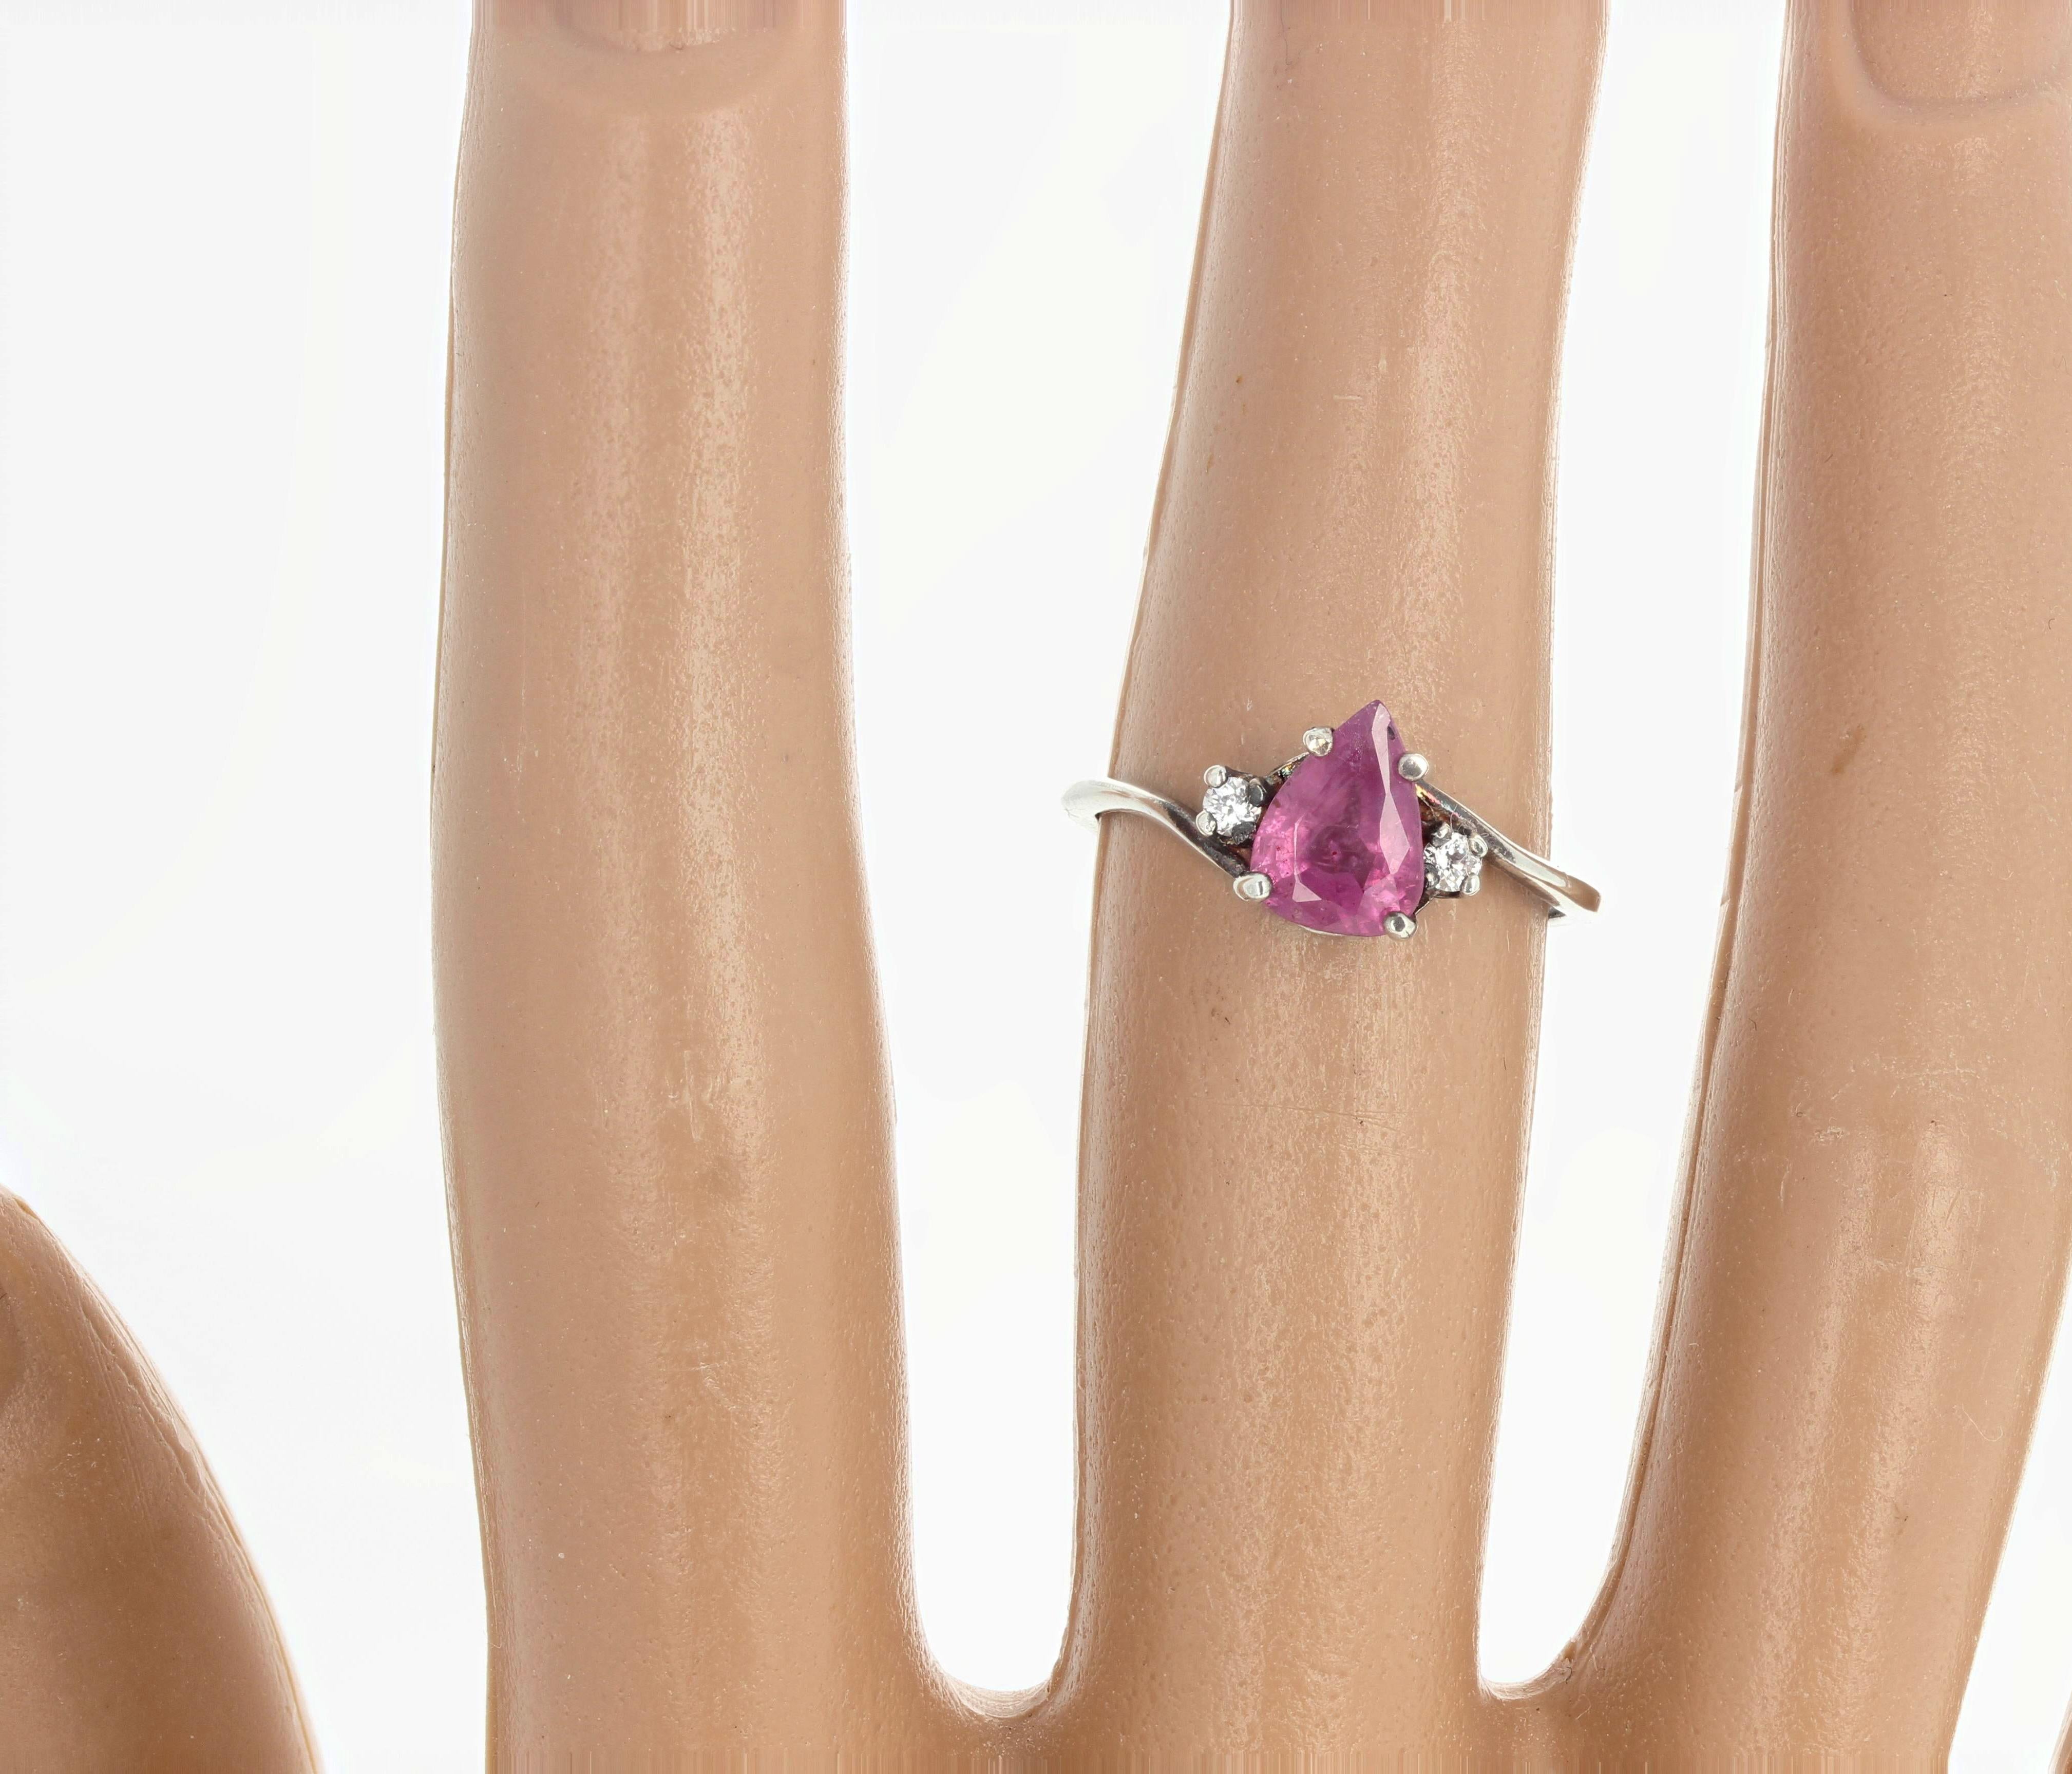 Fascinating pinky glowing tear drop natural shaped Sapphire - 1.87 carats - 8.3 mm x 6 mm - enhanced with tiny brilliant sparkling little white natural Zircons set in this wonderful sterling silver ring size 7 sizable.  This sparkles beautifully